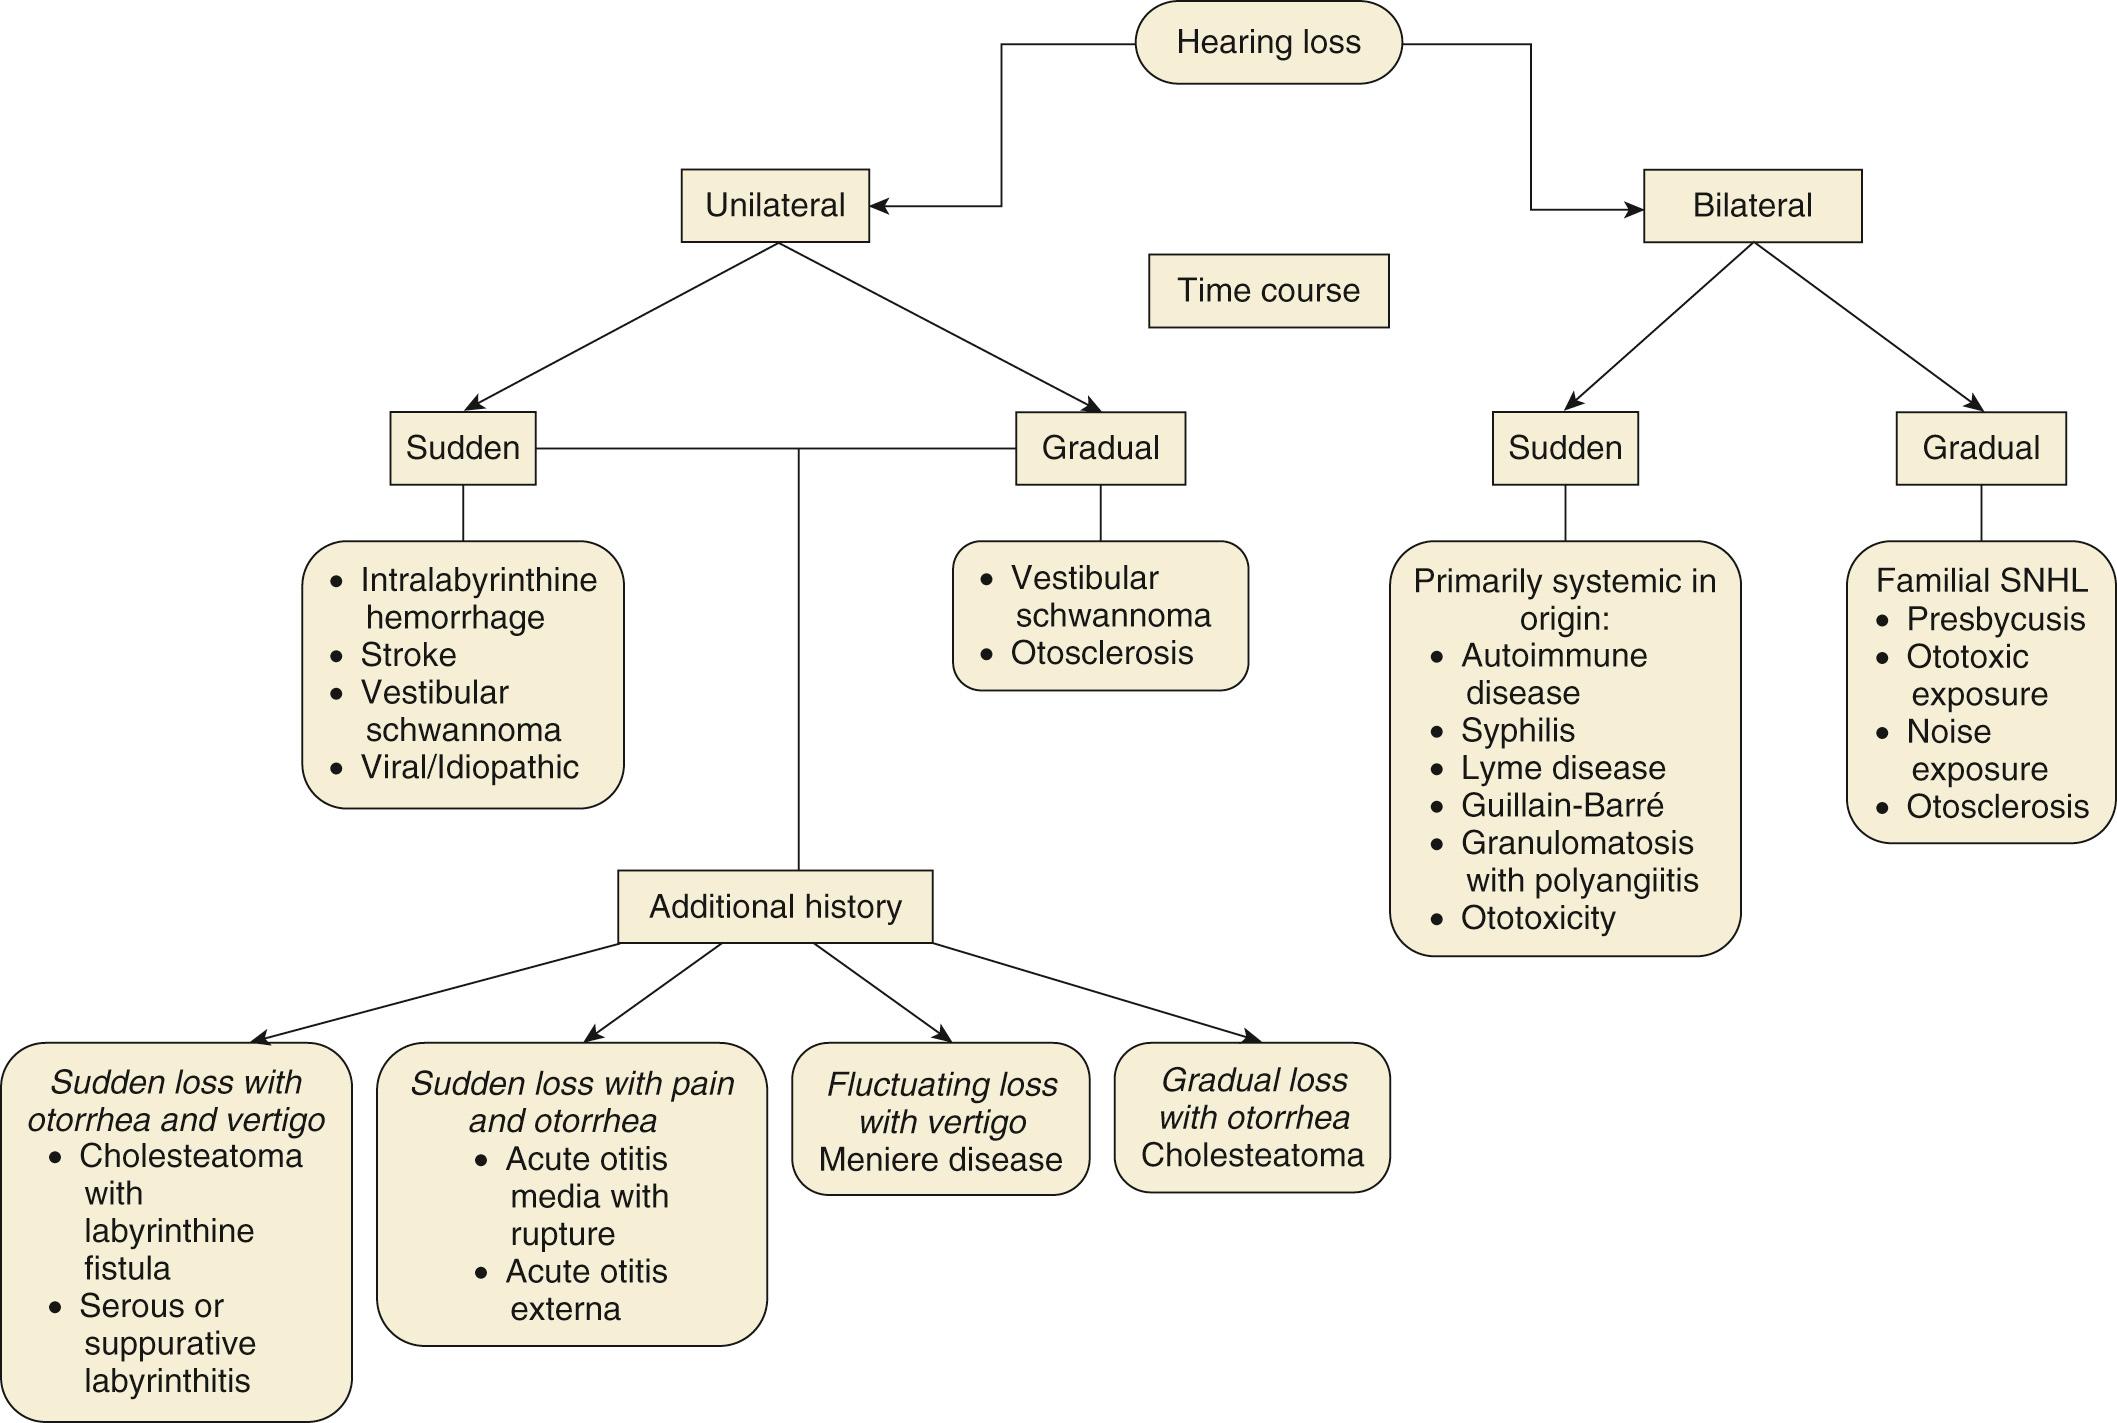 Fig. 137.1, Establishing a differential diagnosis with a chief complaint of hearing loss. This algorithm encourages the clinician to consider the patient complaint in categorical differential diagnosis families. It is not exhaustive. SNHL , Sensorineural hearing loss.